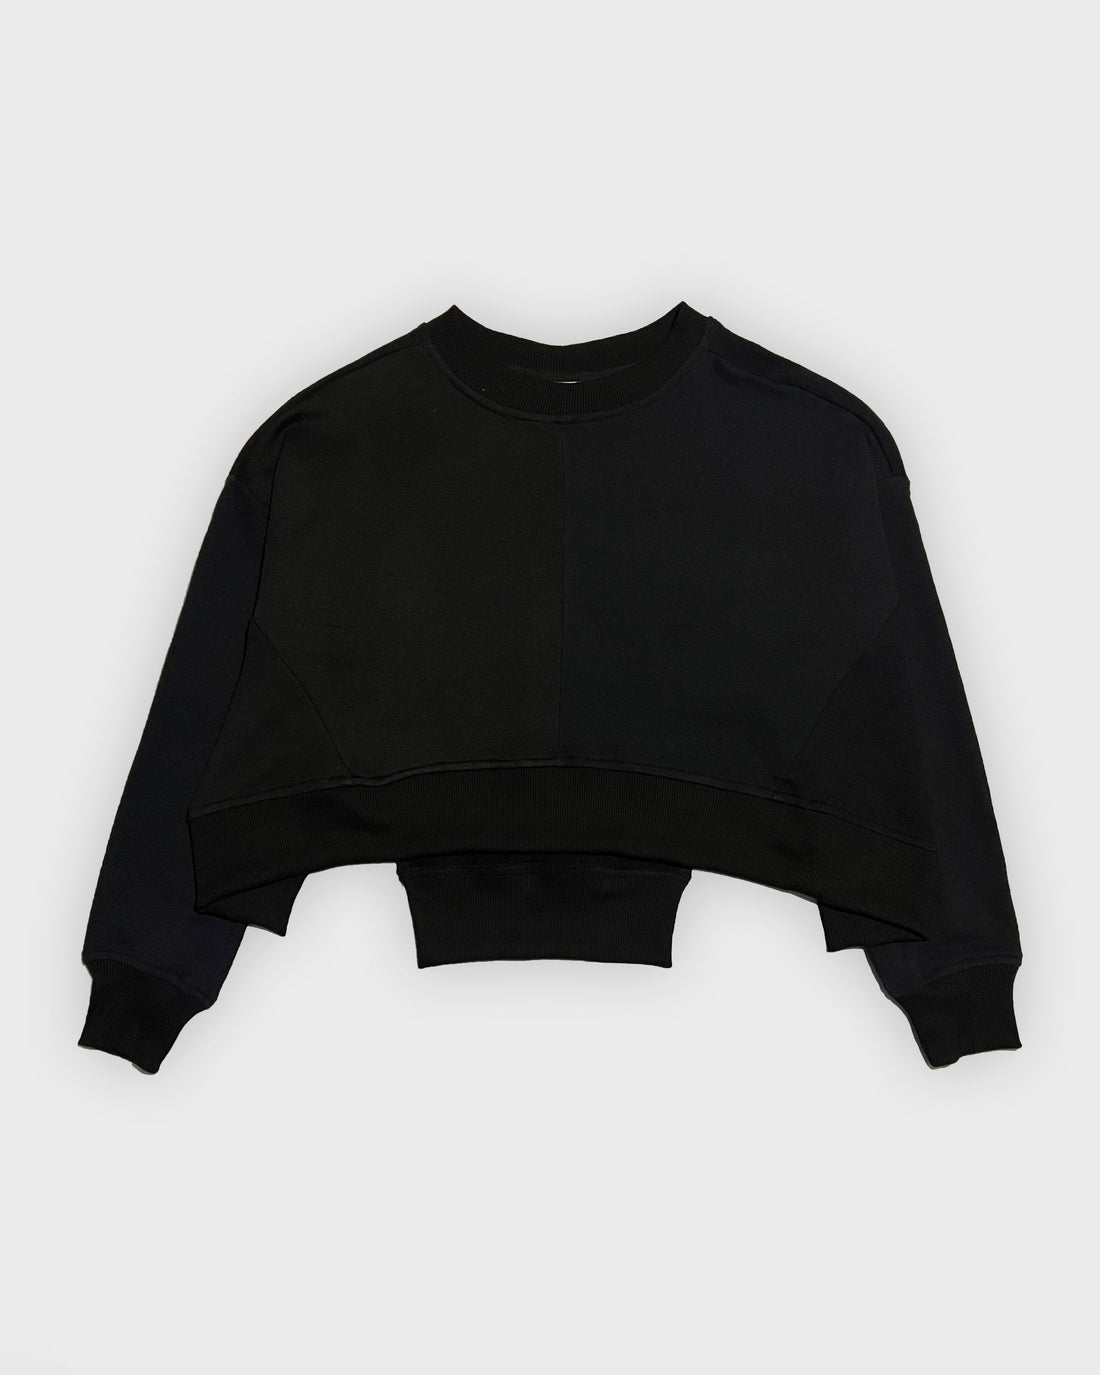 CROPPED SWEATER (BLACK)